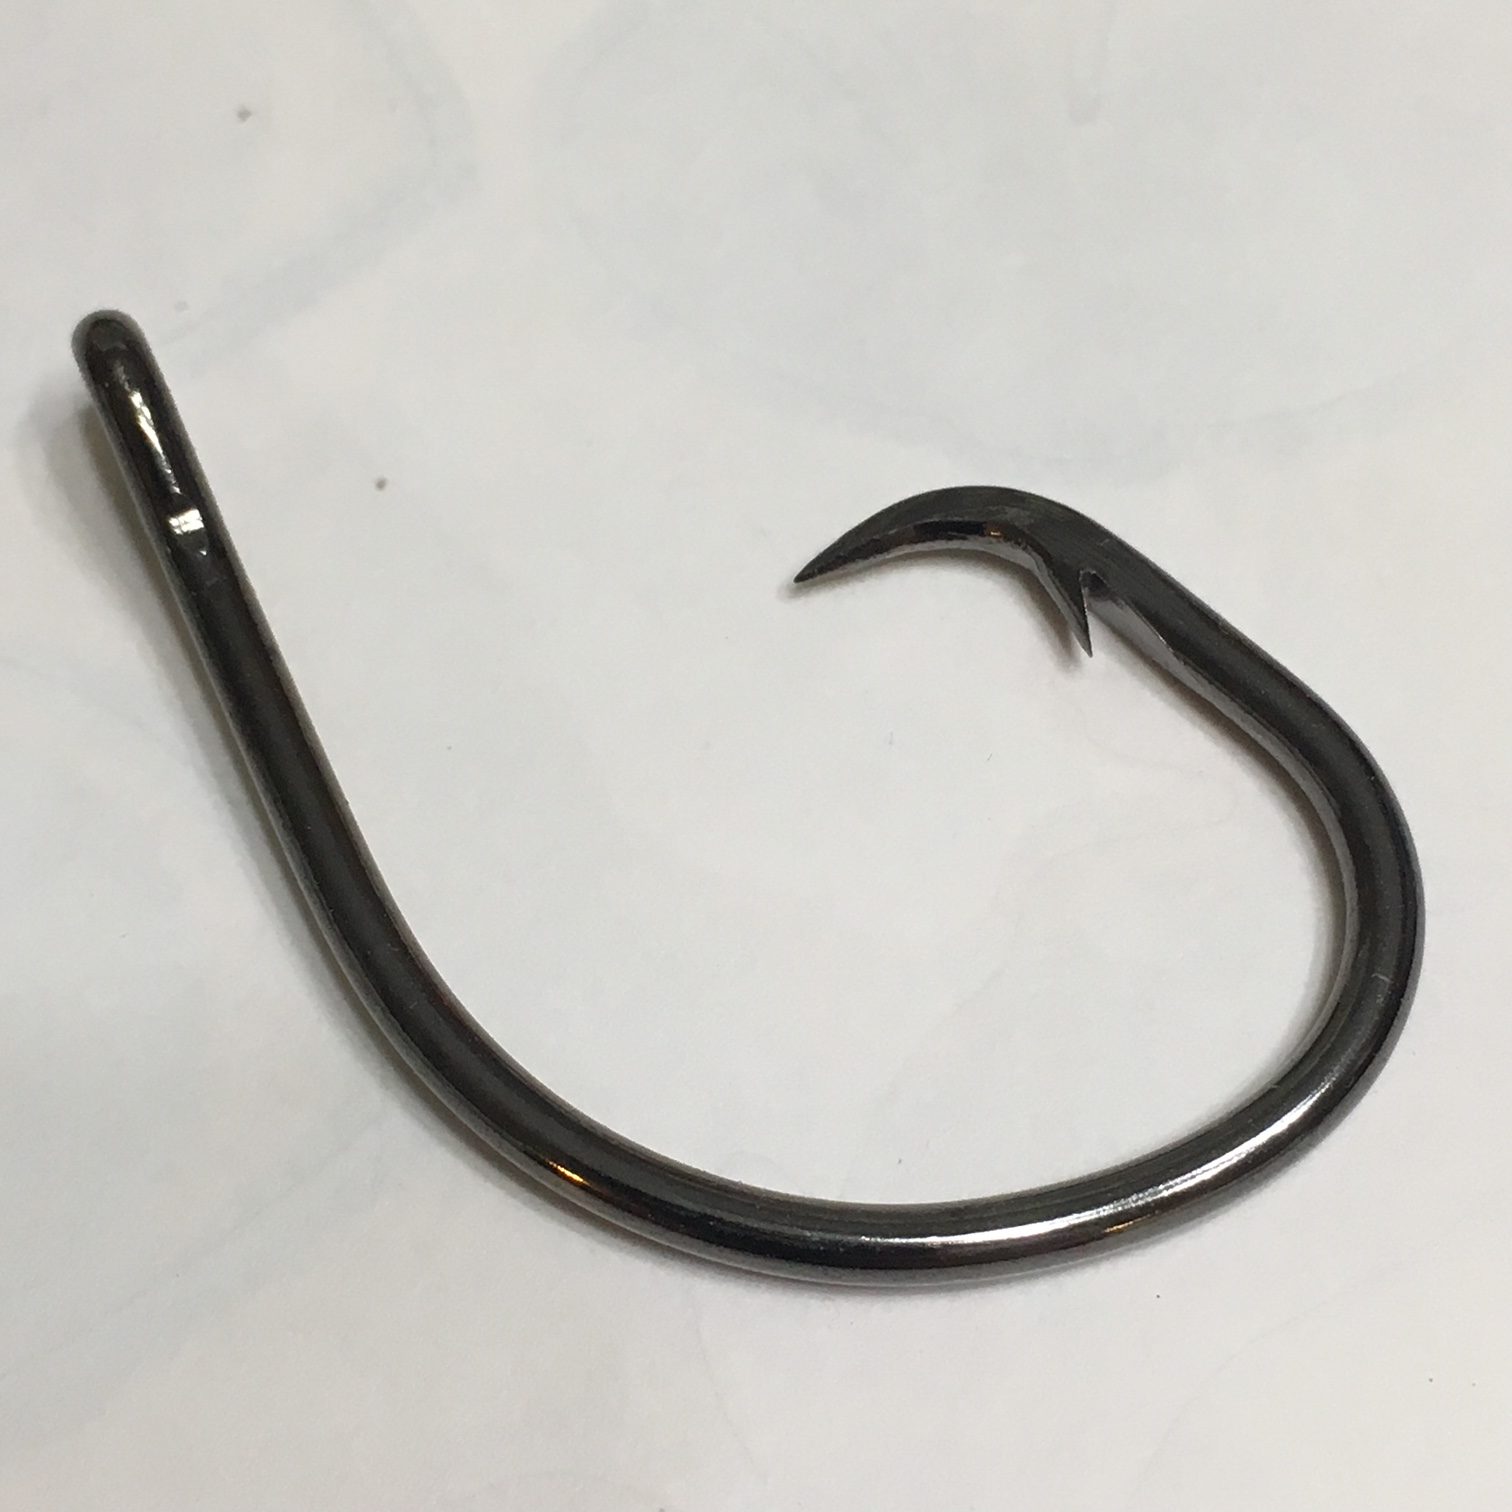 3 Reasons You Should Use Circle Hooks - The Angler Within All The Advantages